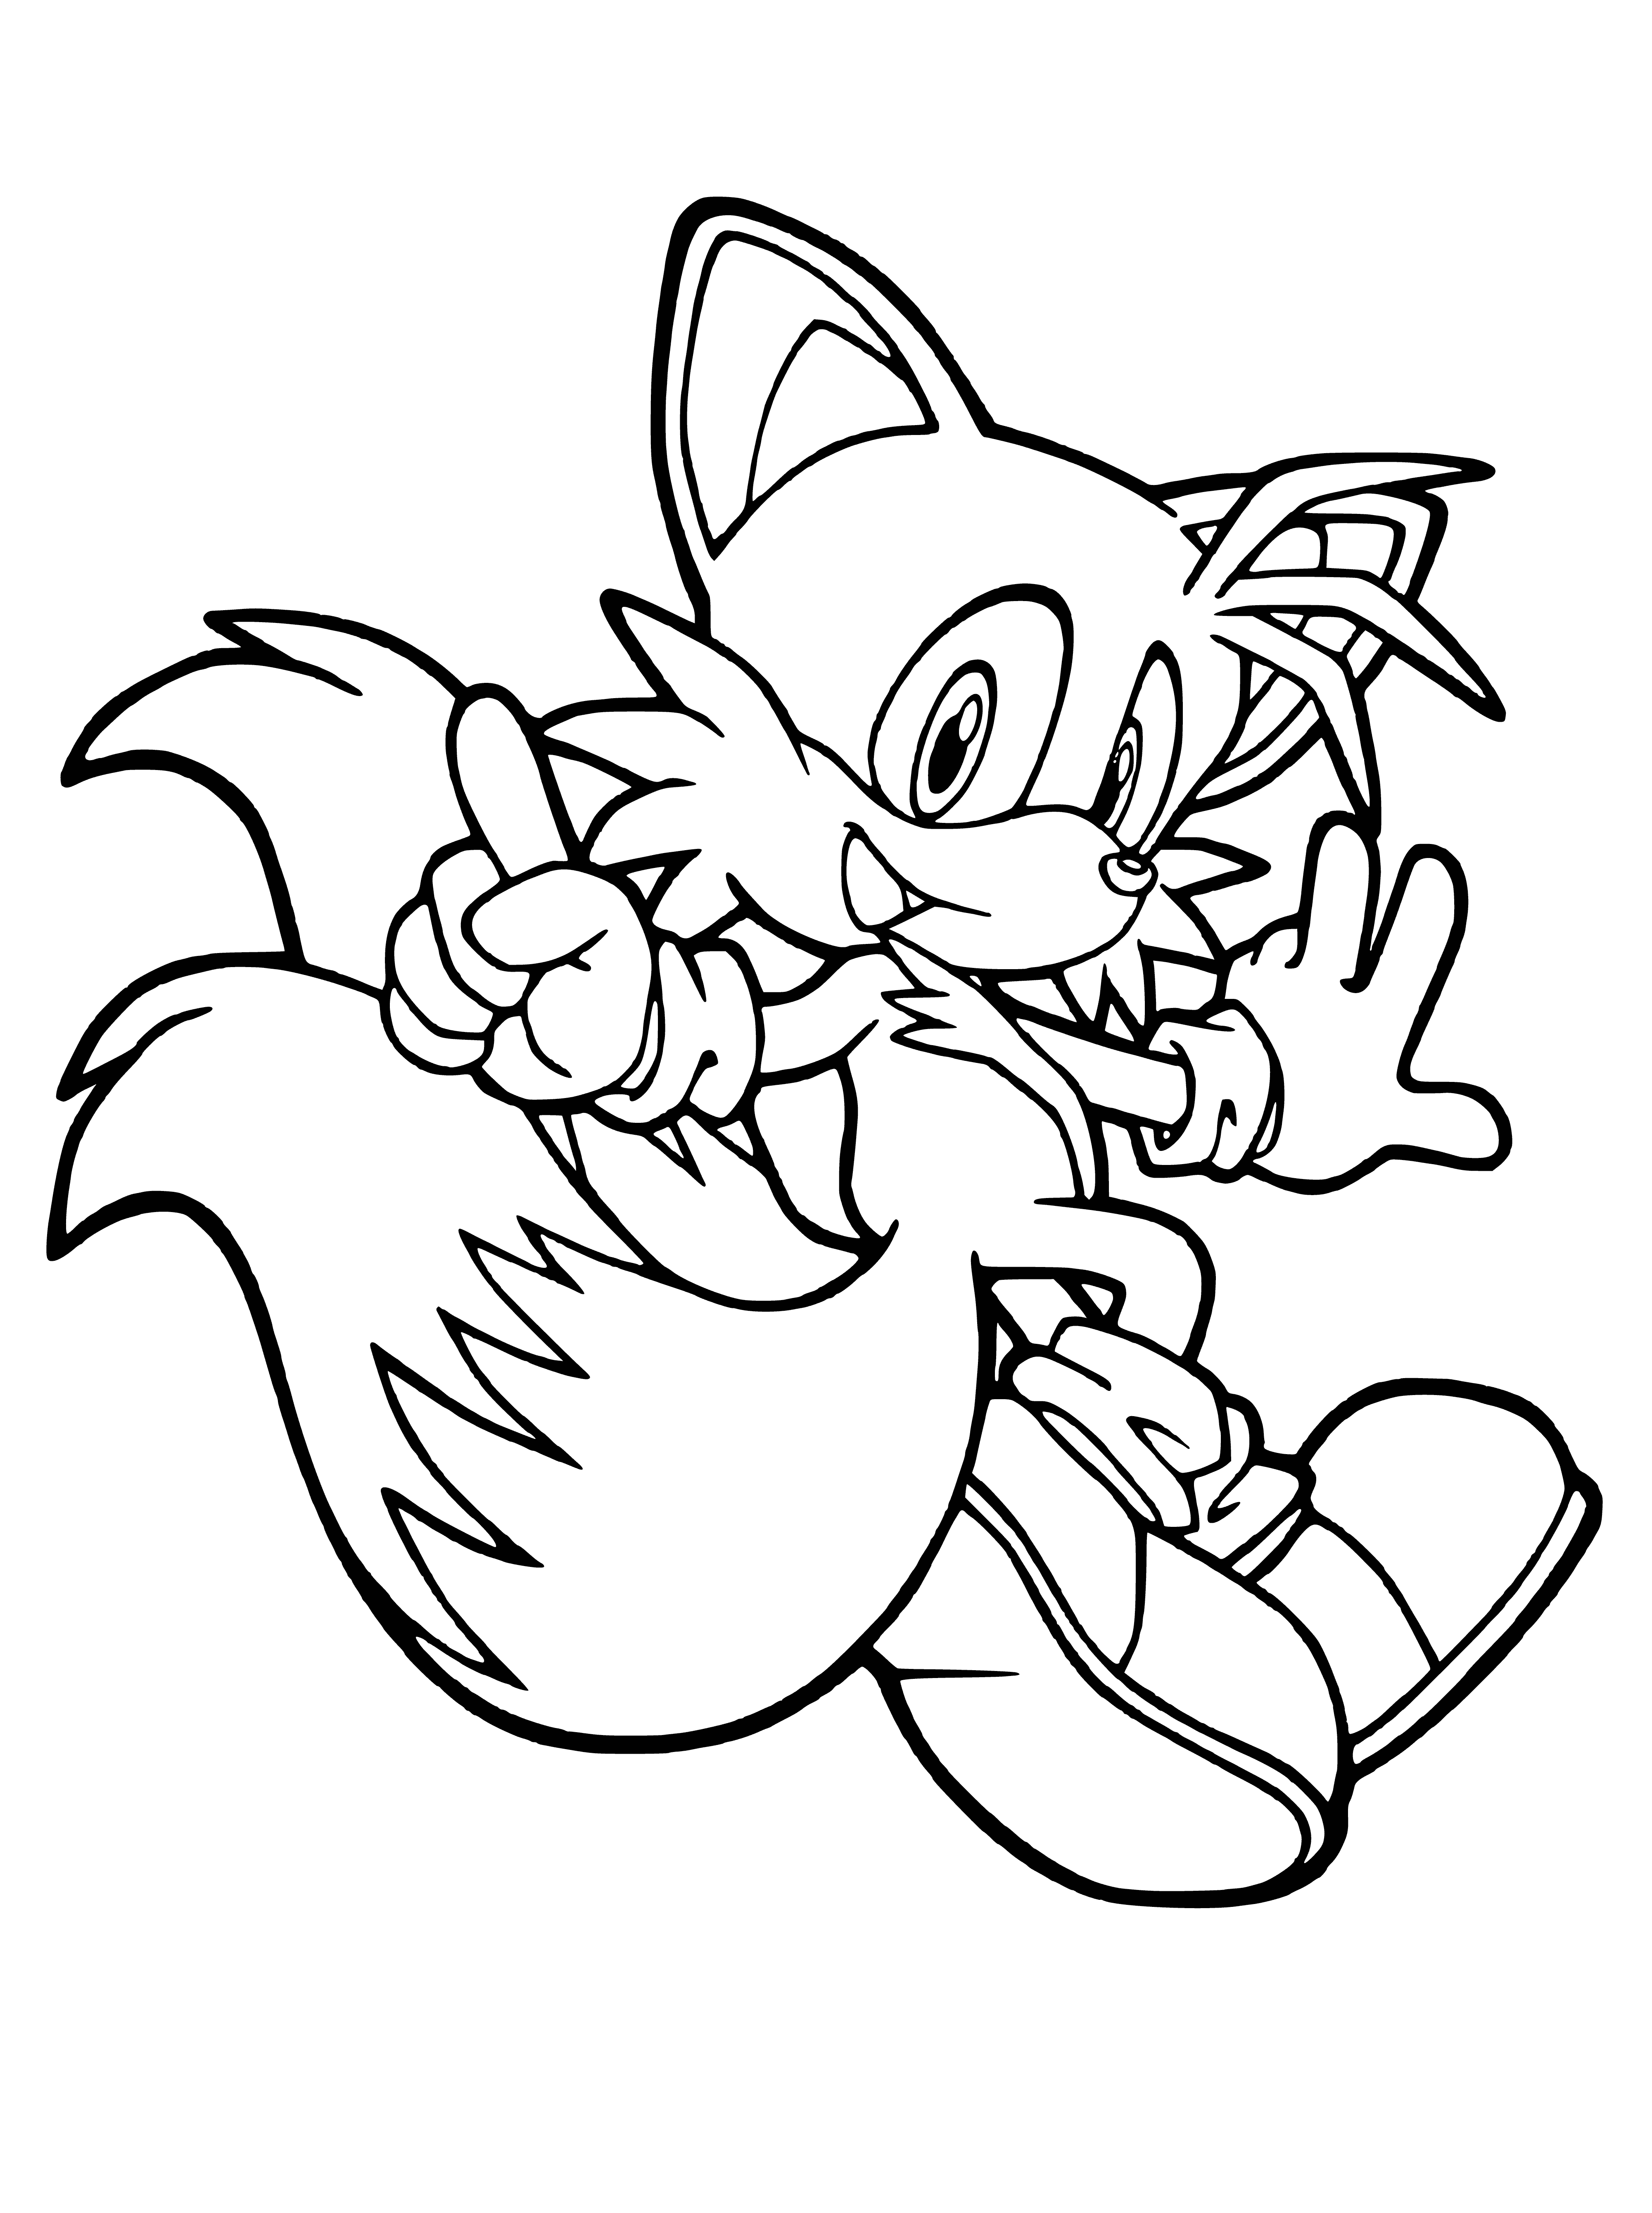 Miles coloring page